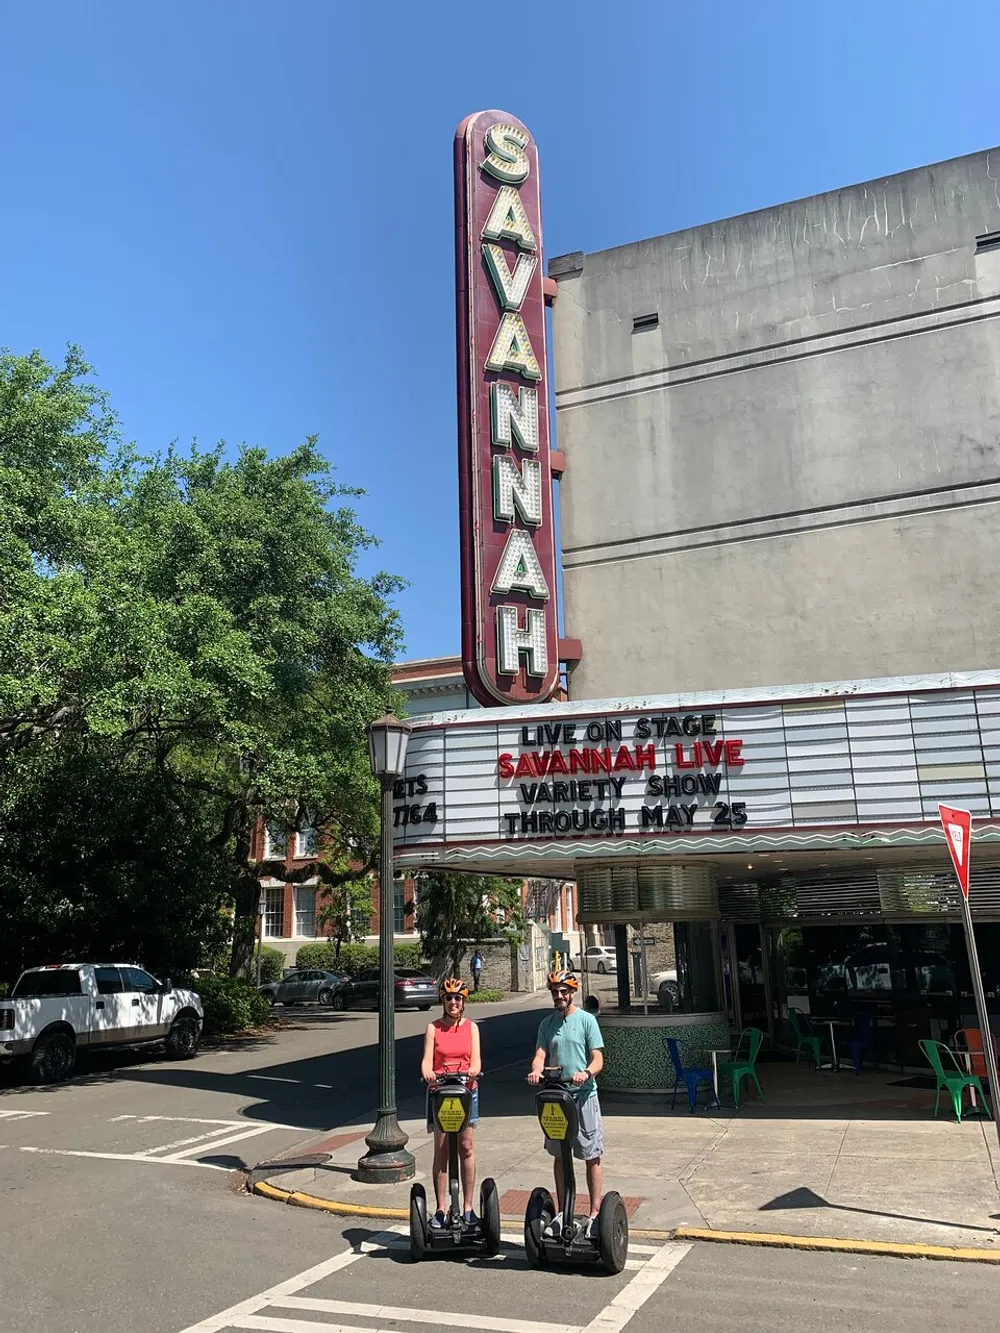 Two people wearing helmets riding Segways in front of the Savannah Theater with its classic marquee announcing a live variety show